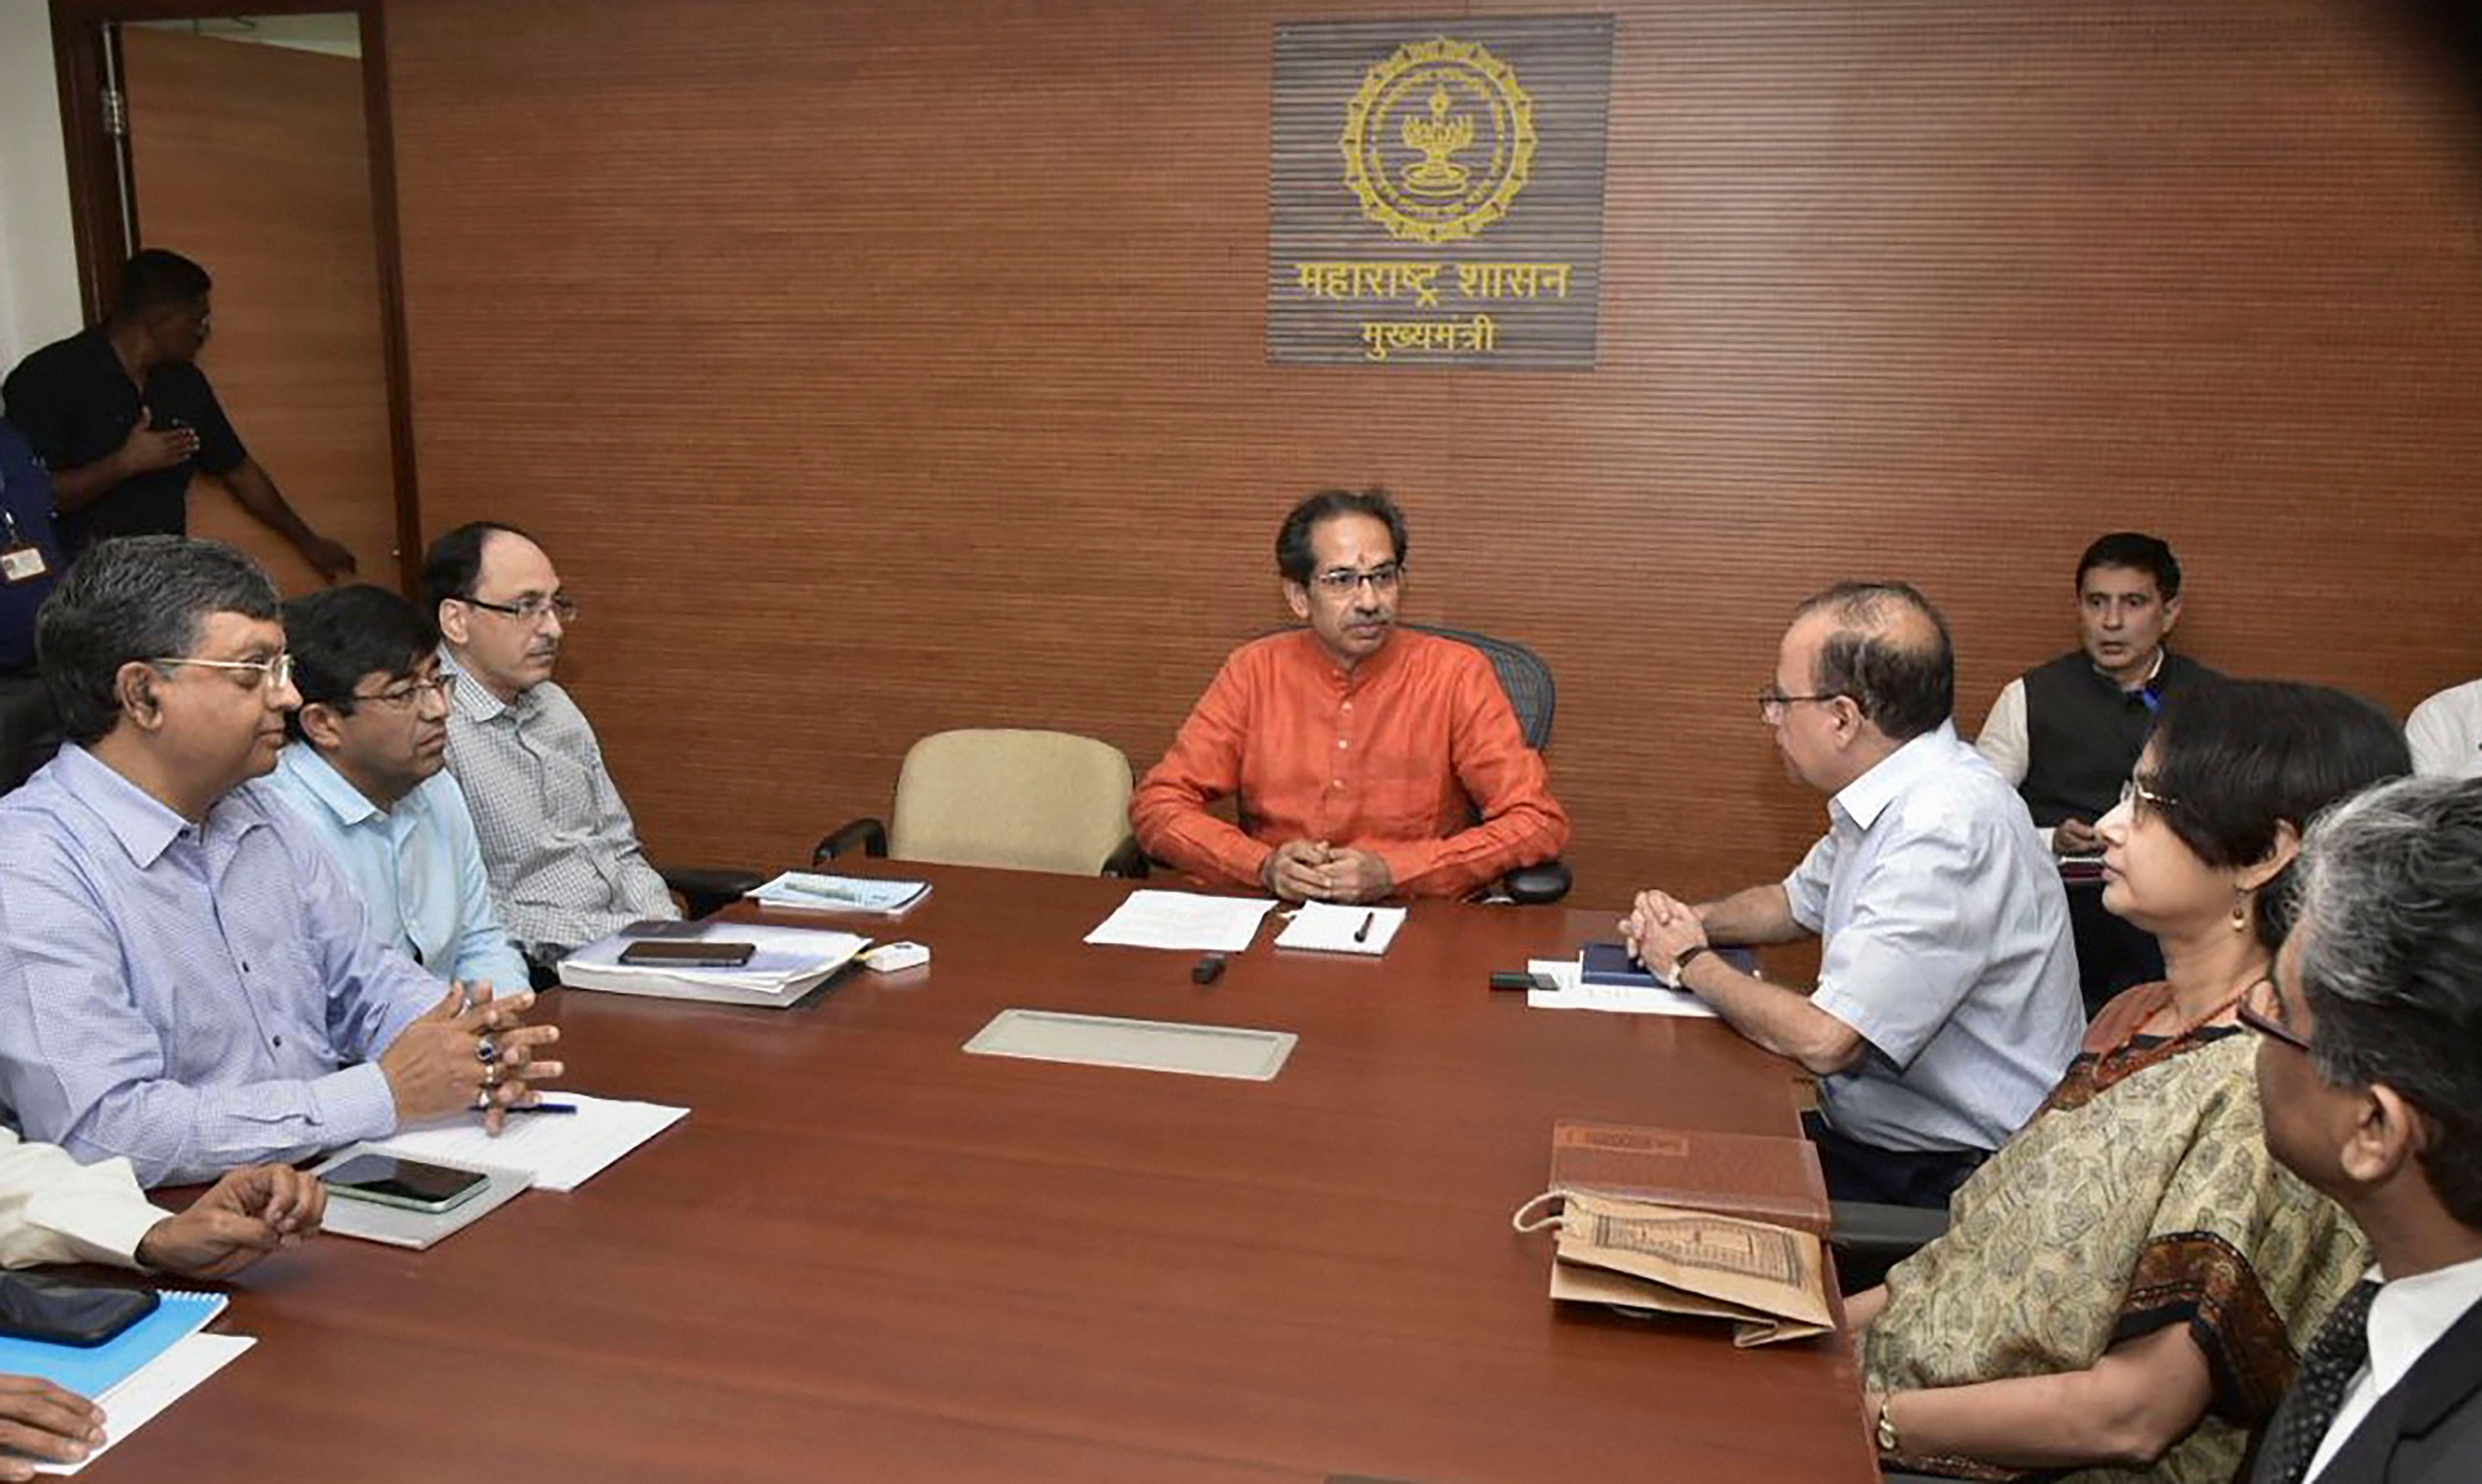 Maharashtra Chief Minister Uddhav Thackeray in a meeting with senior officers at Mantralaya after formally taking charge of his office, in Mumbai. (PTI Photo)